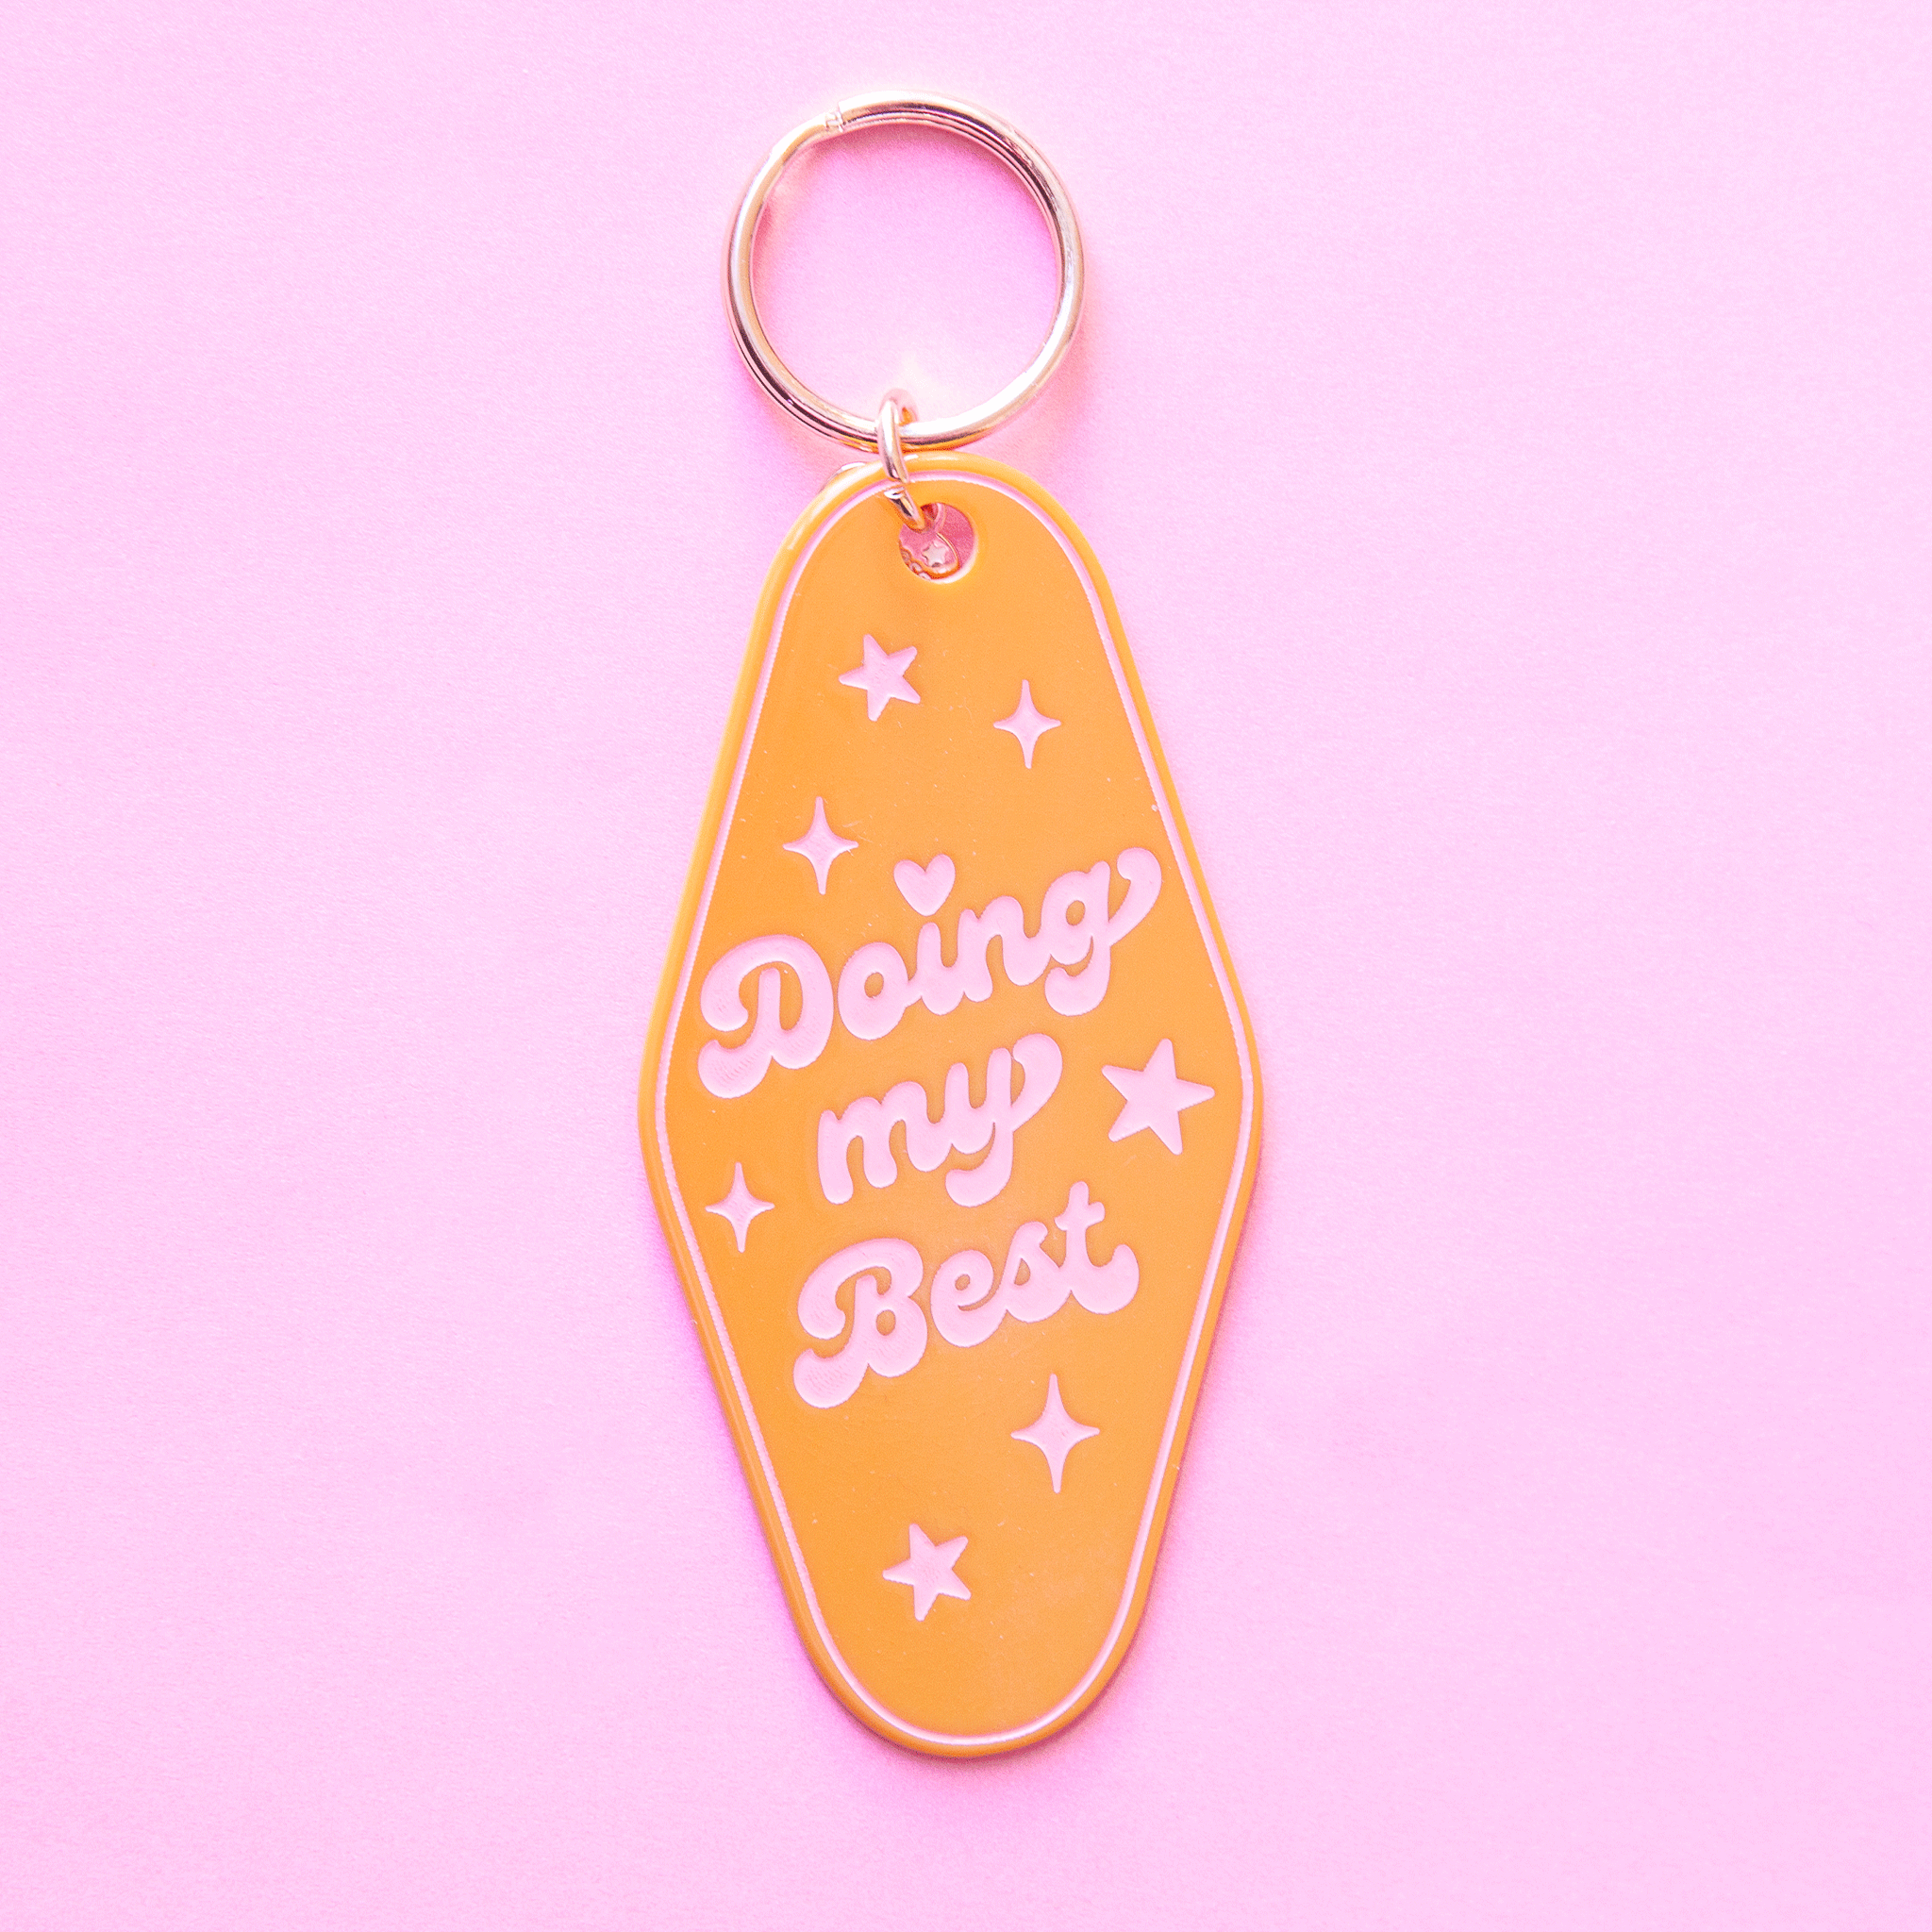 On a purple background is a mustard yellow diamond shaped keychain with a gold loop and pink text that reads, &quot;Doing my Best&quot; surrounded by star shapes and sparkles.